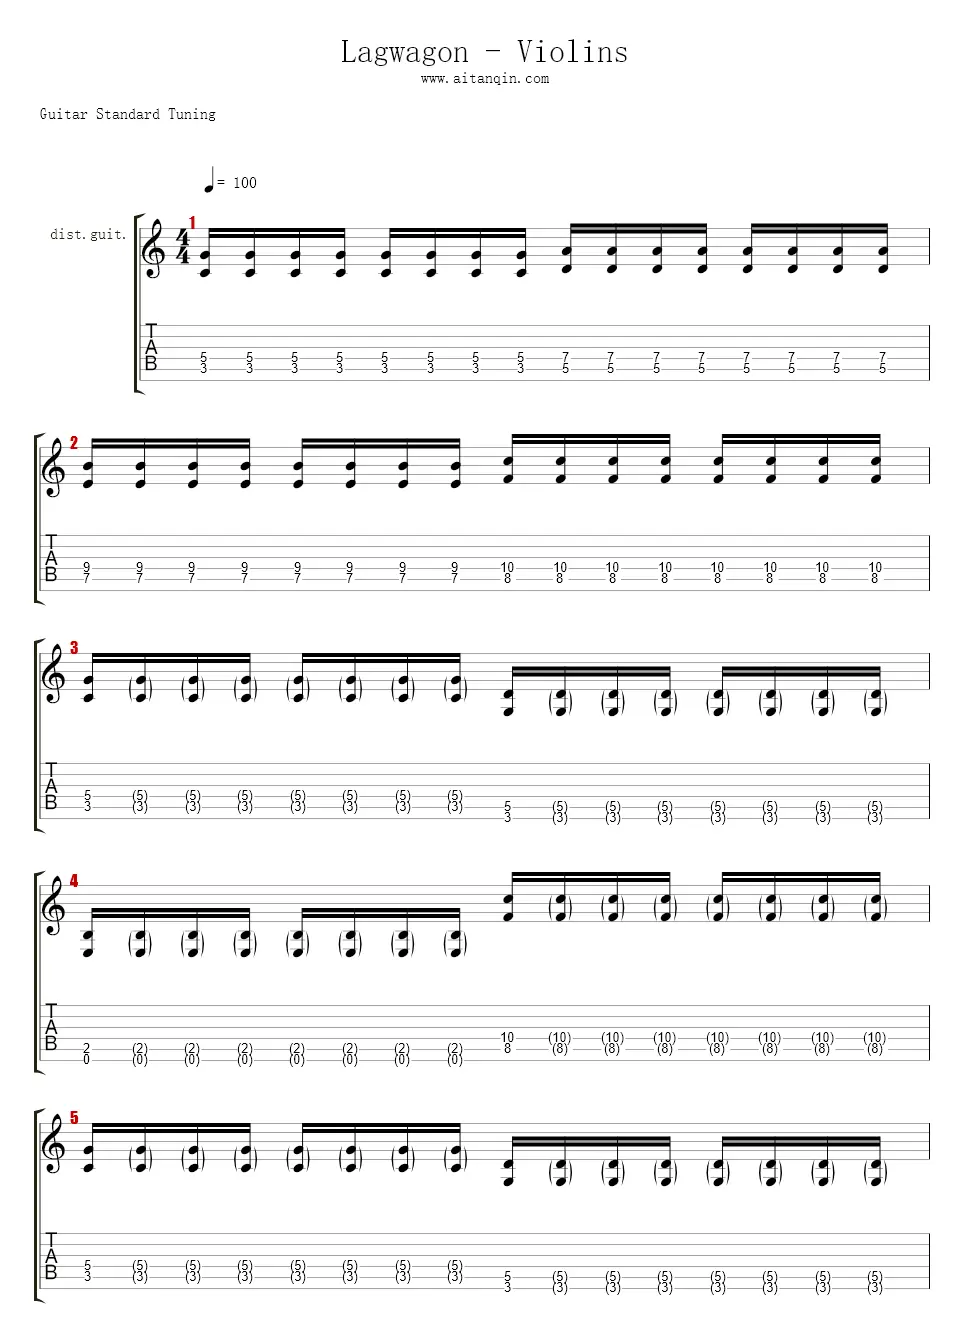 lagwagon violins tab - What is the tablature for the violin